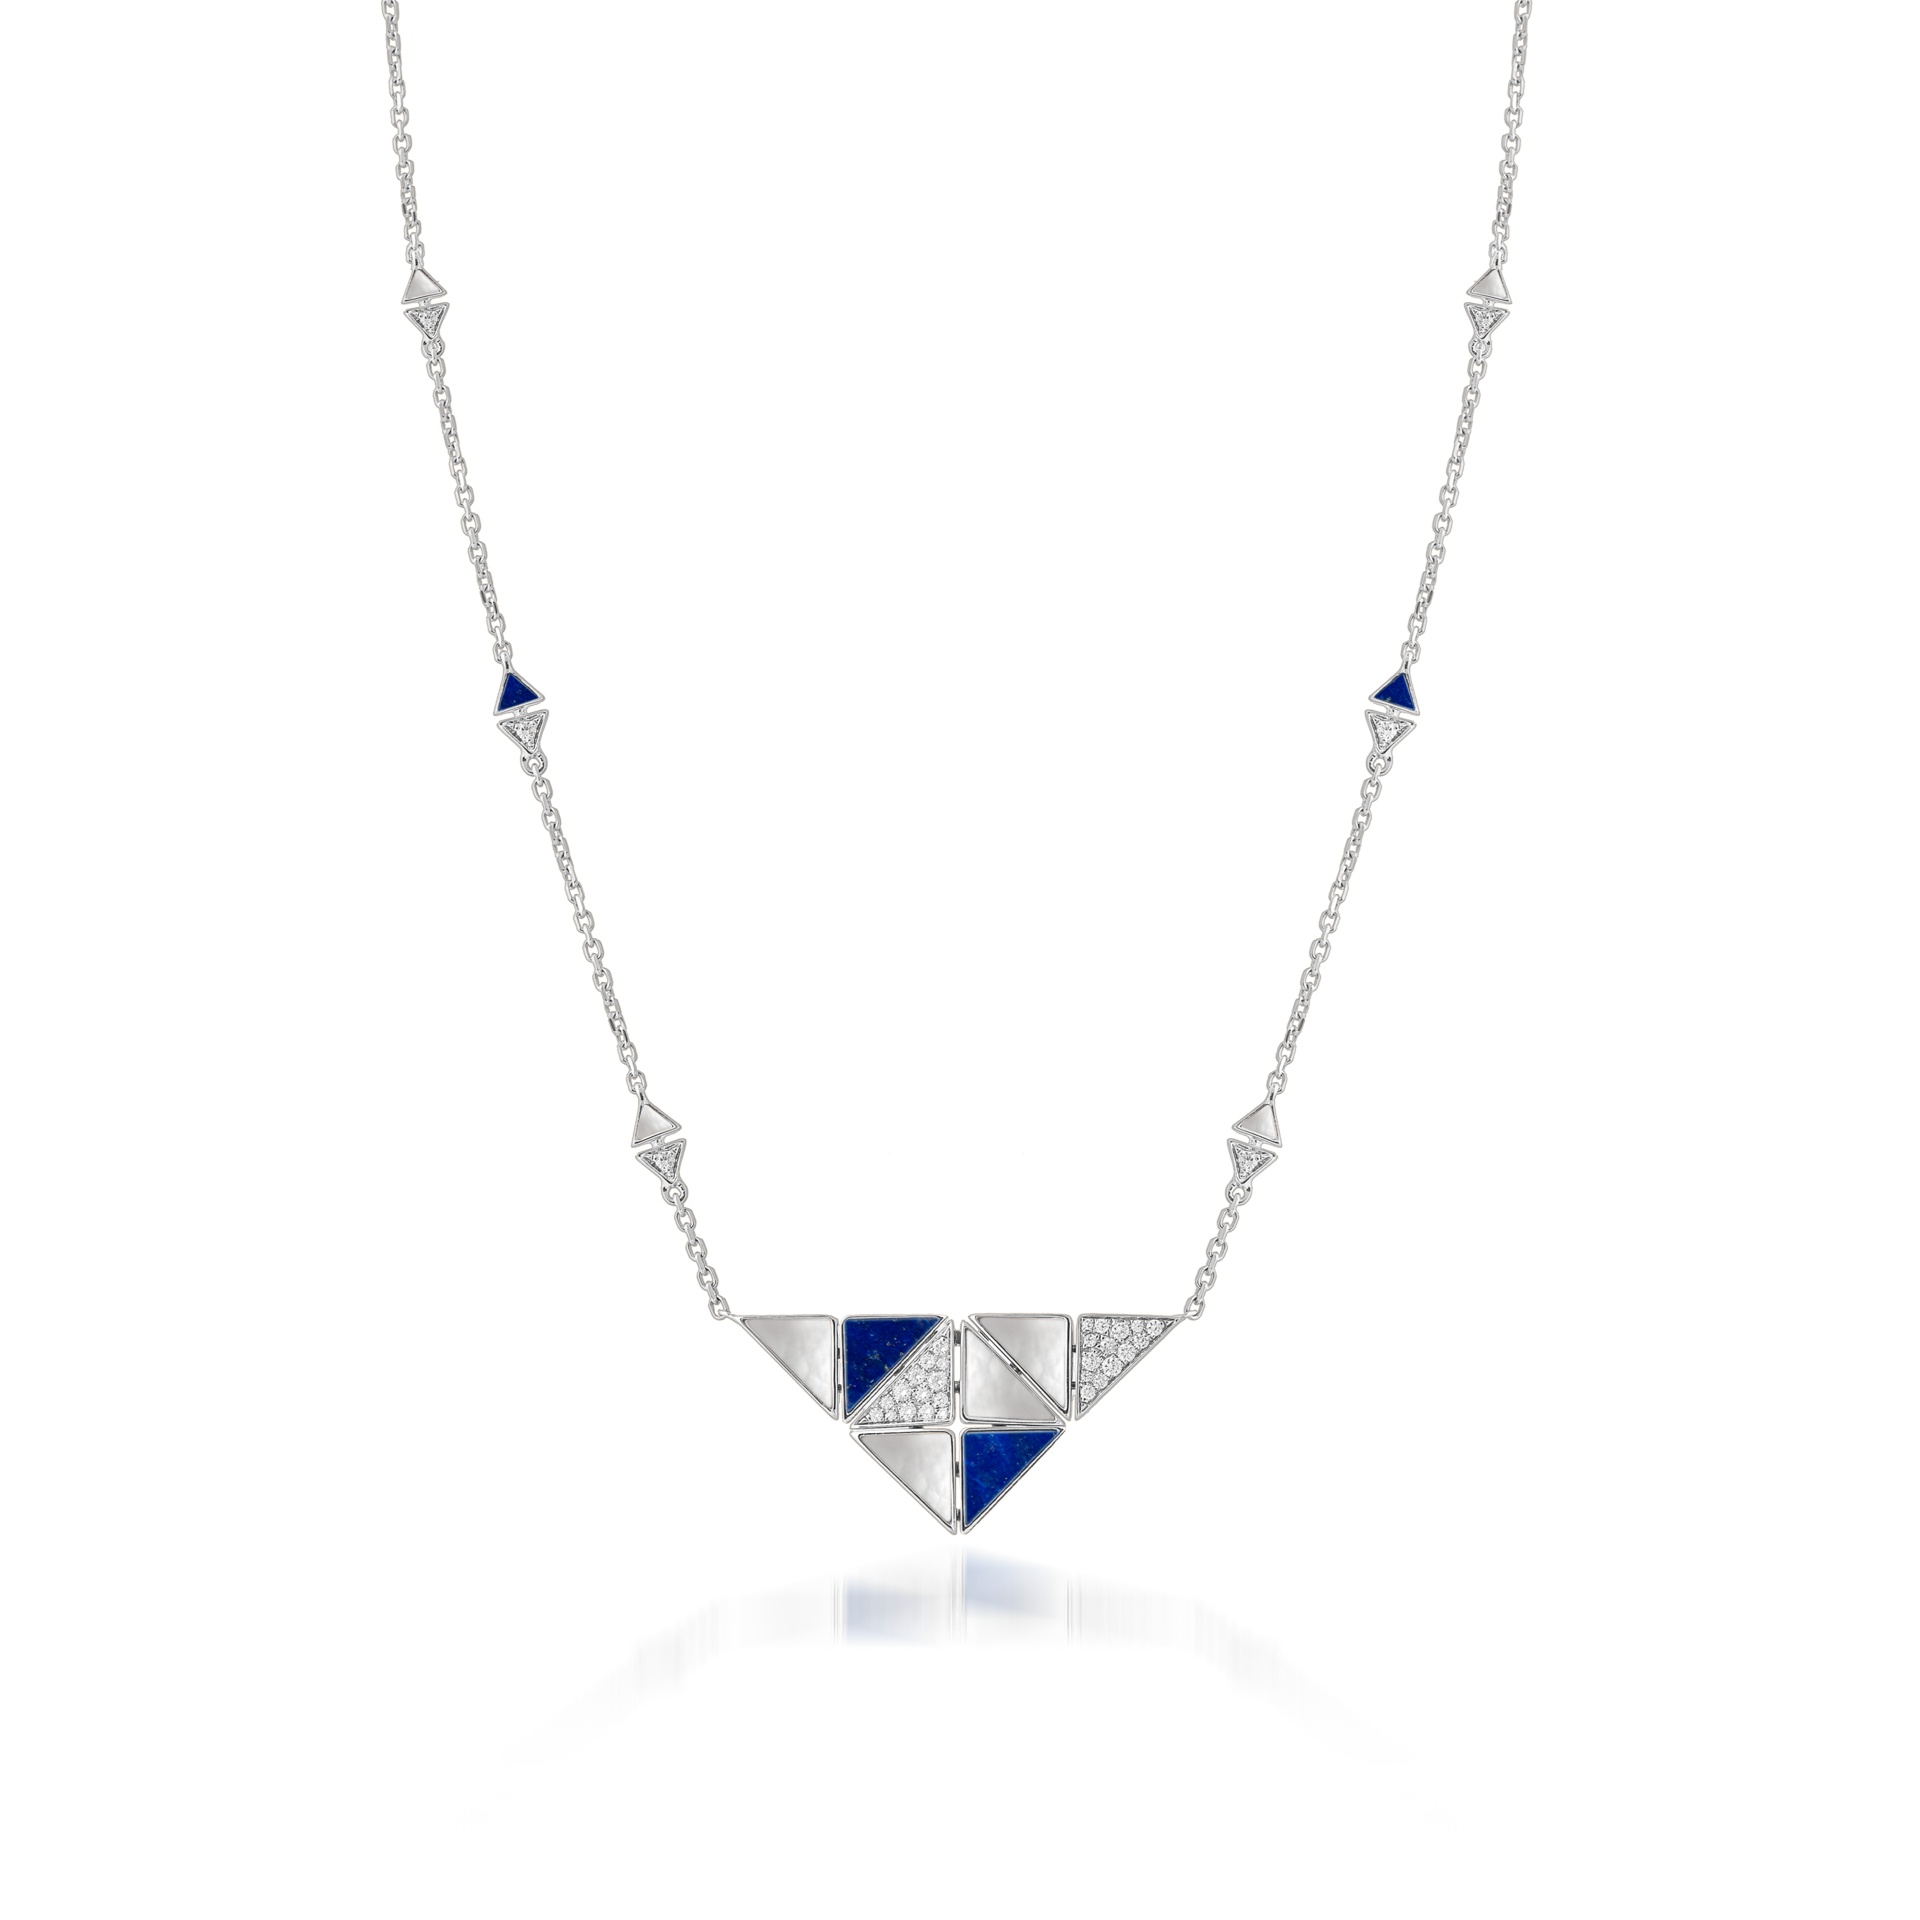 Deco Quadratic Necklace with Lapis Lazuli, White Mother of Pearl and Diamonds  In 18K White Gold